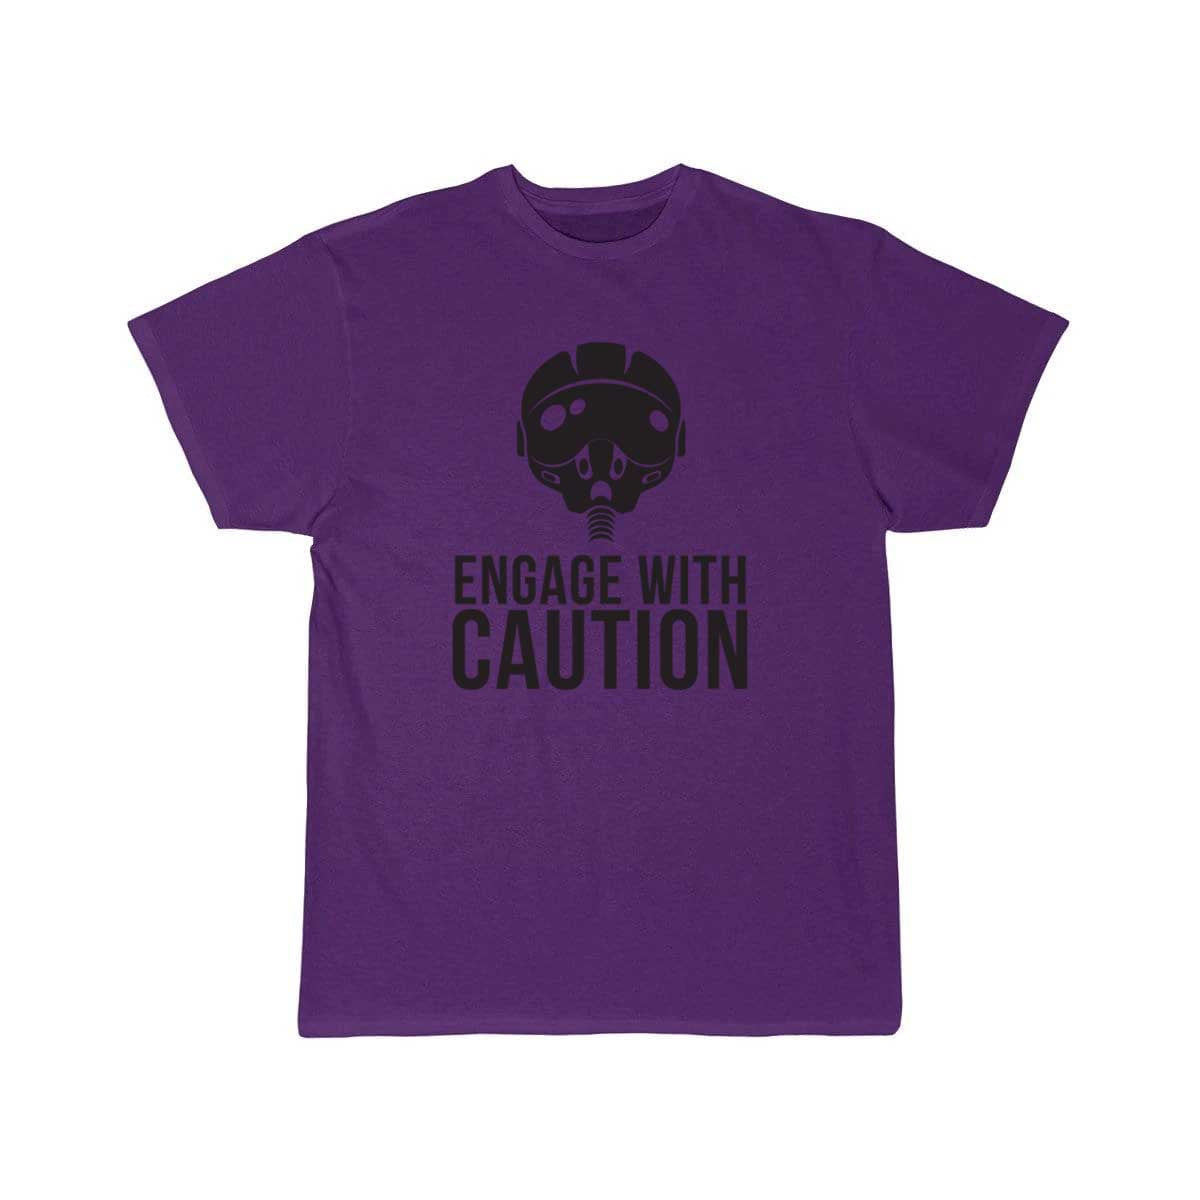 Engage with Caution fighter pilot T SHIRT THE AV8R